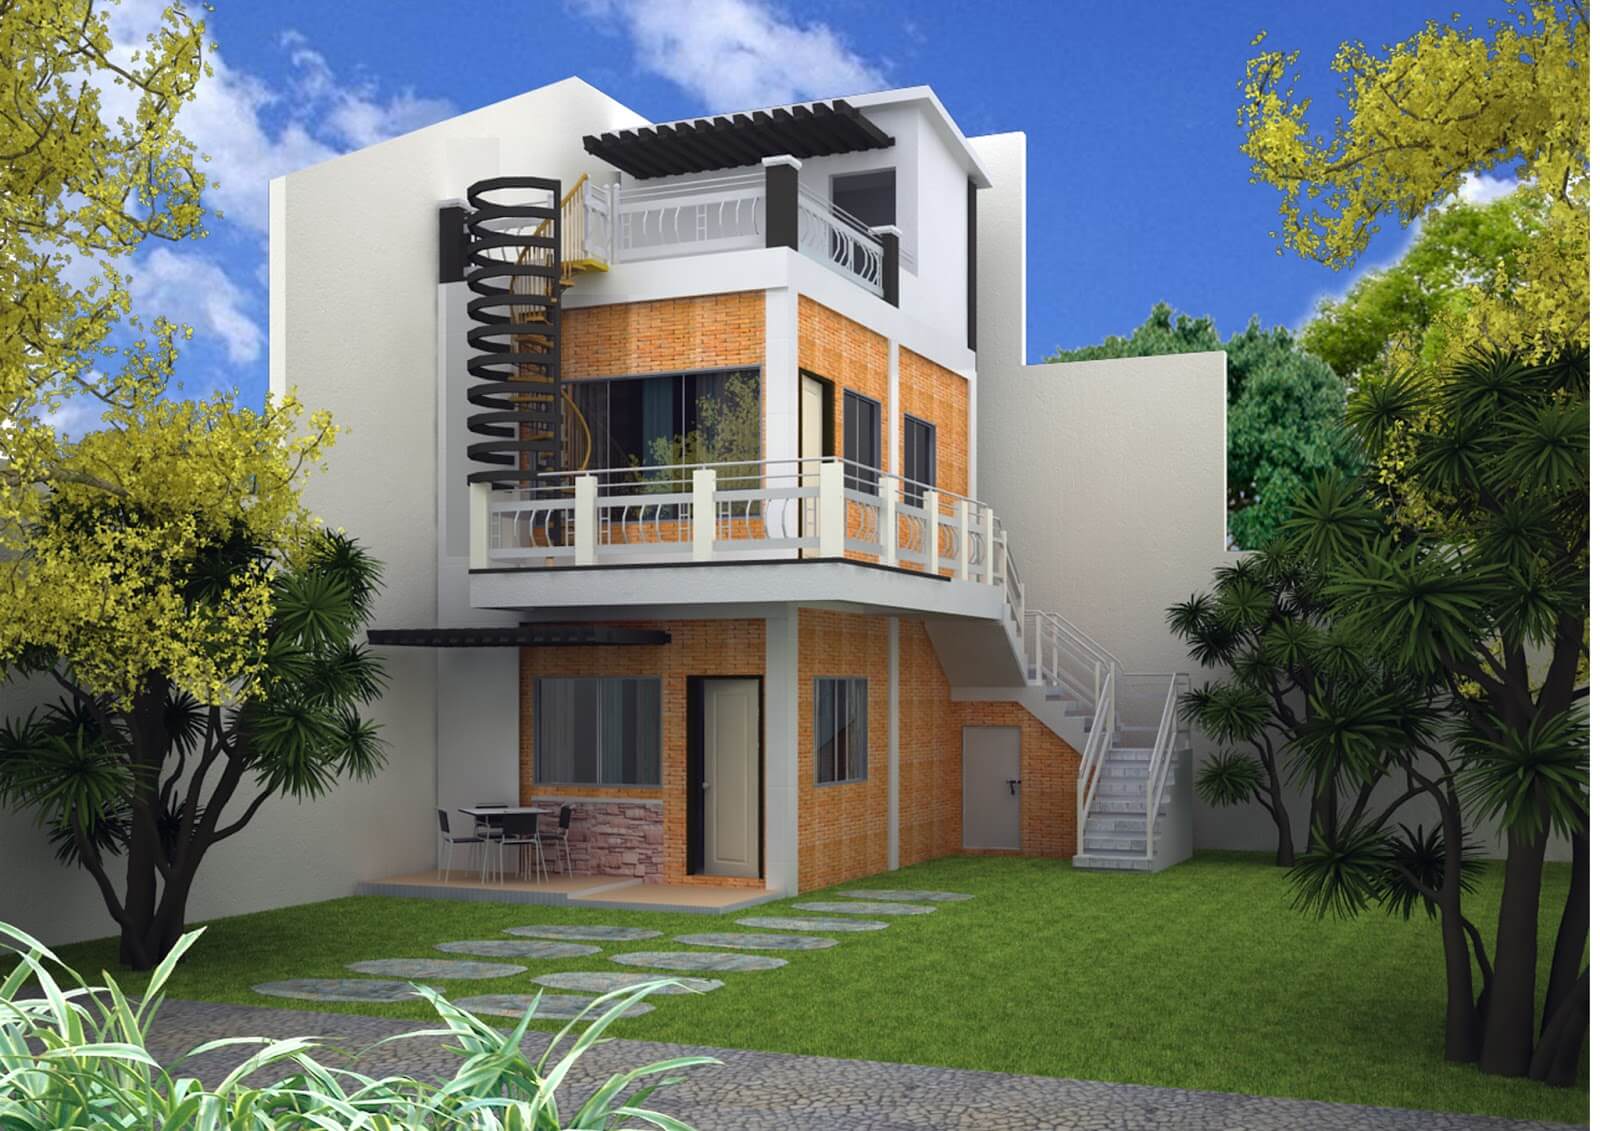 Get Philippine Small House Design Two Storey Images - CaetaNoveloso.com